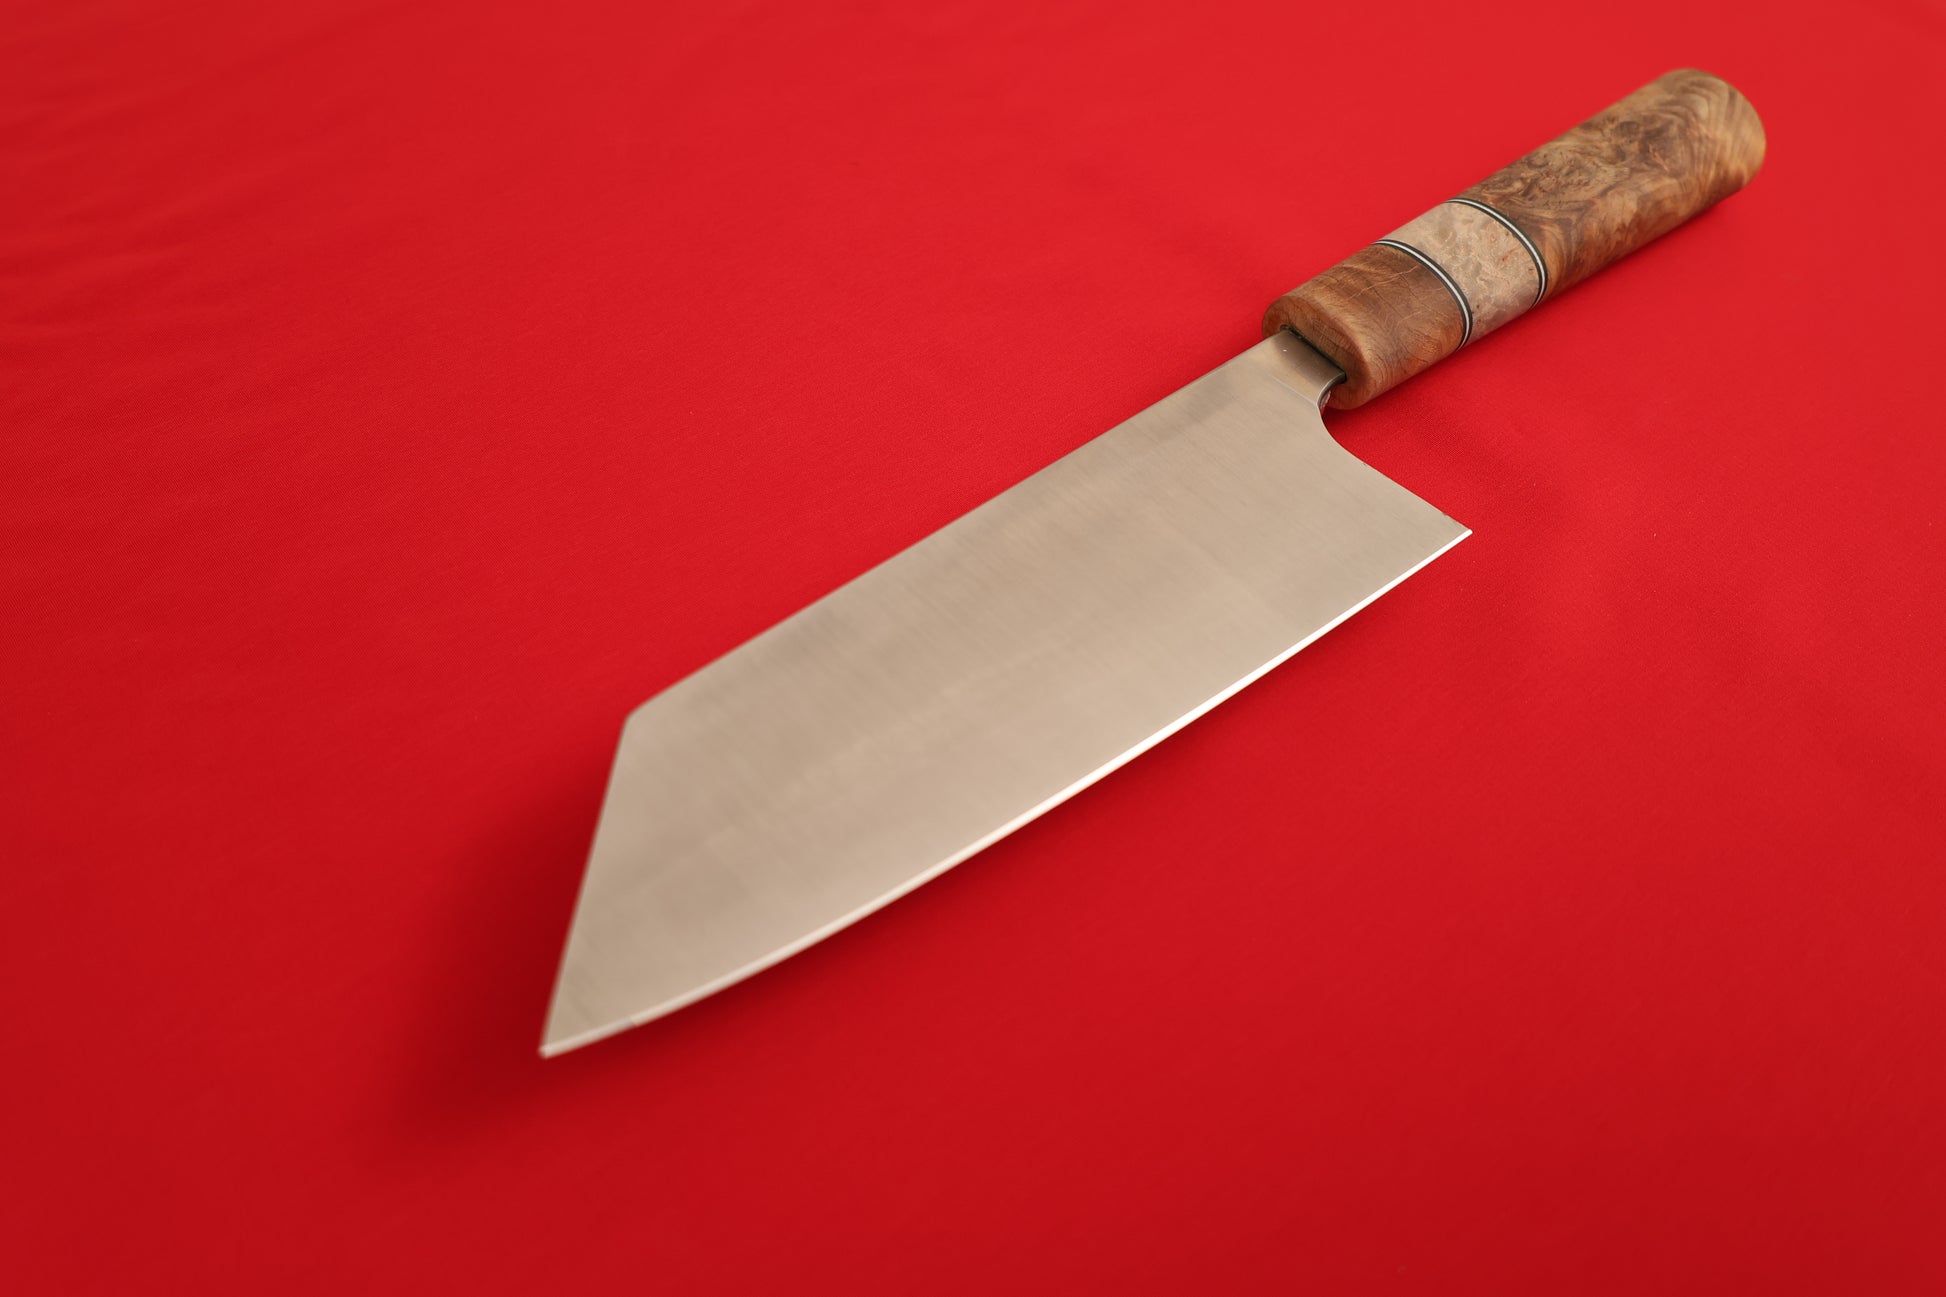 Bunka with a wooden handle on a red background.